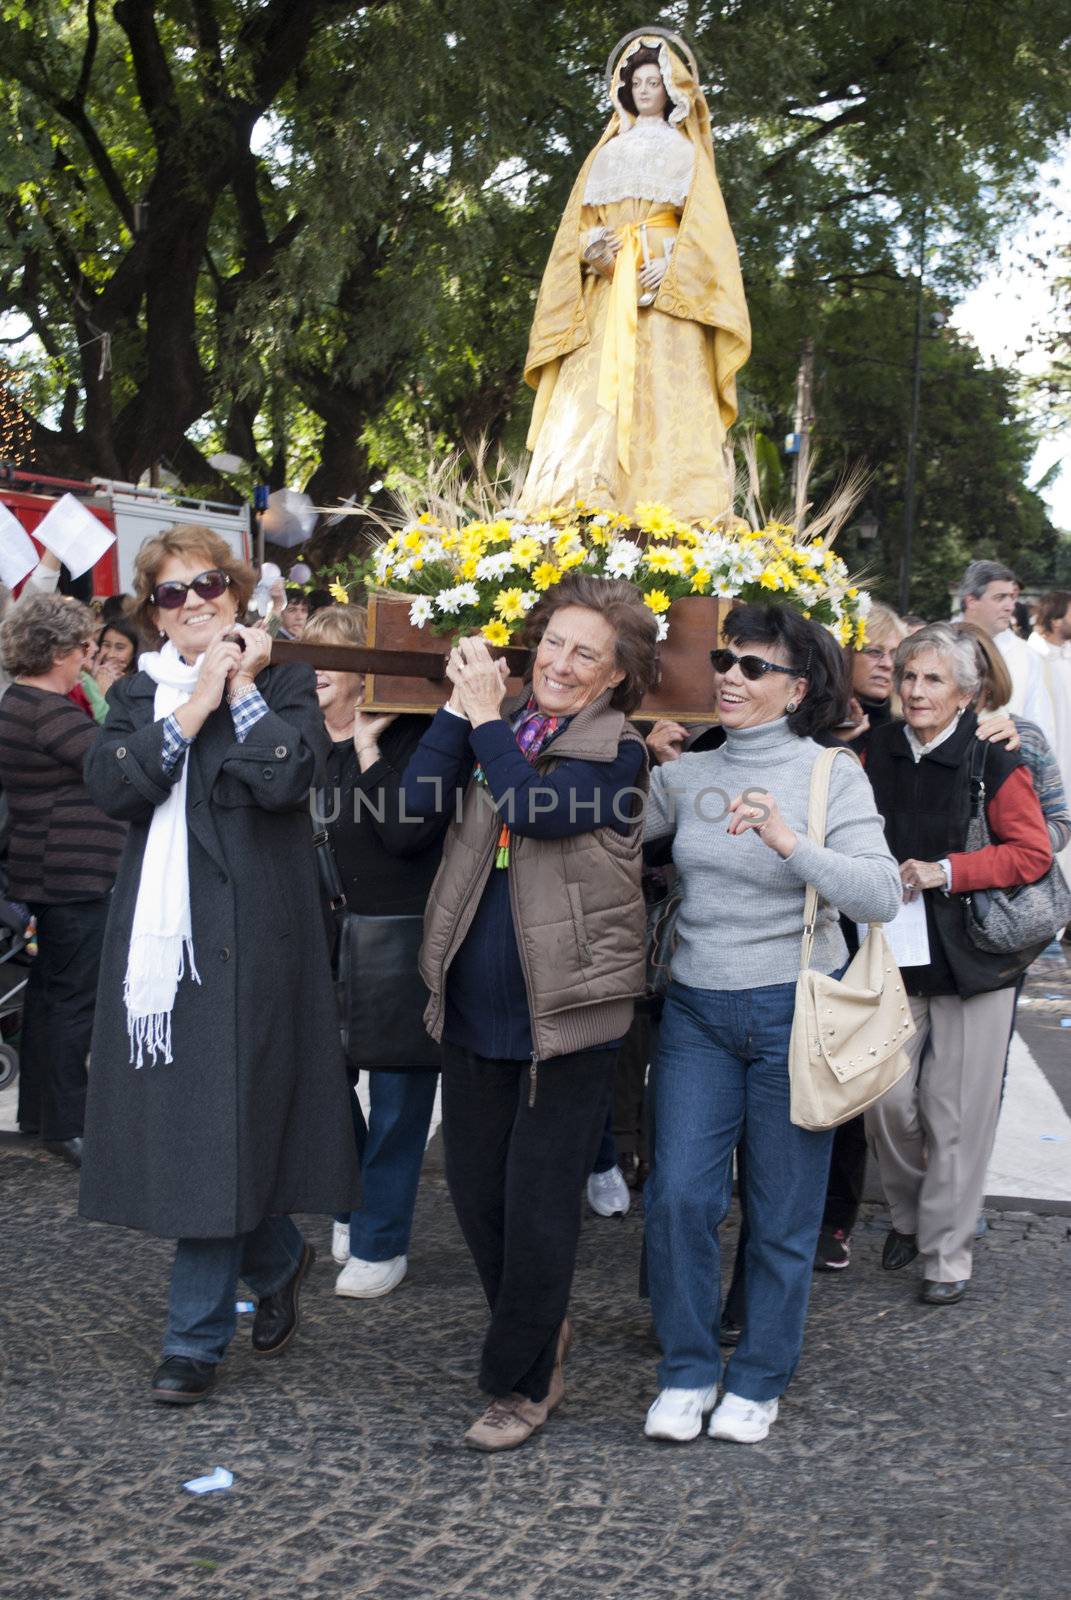 Argentina - Buenos Aires - May 15, 2012:women taking the Virgin during prosecion in commemoration of the celebration of San Isidro Labrador in the cathedral that bears his name located in the province of Buenos Aires